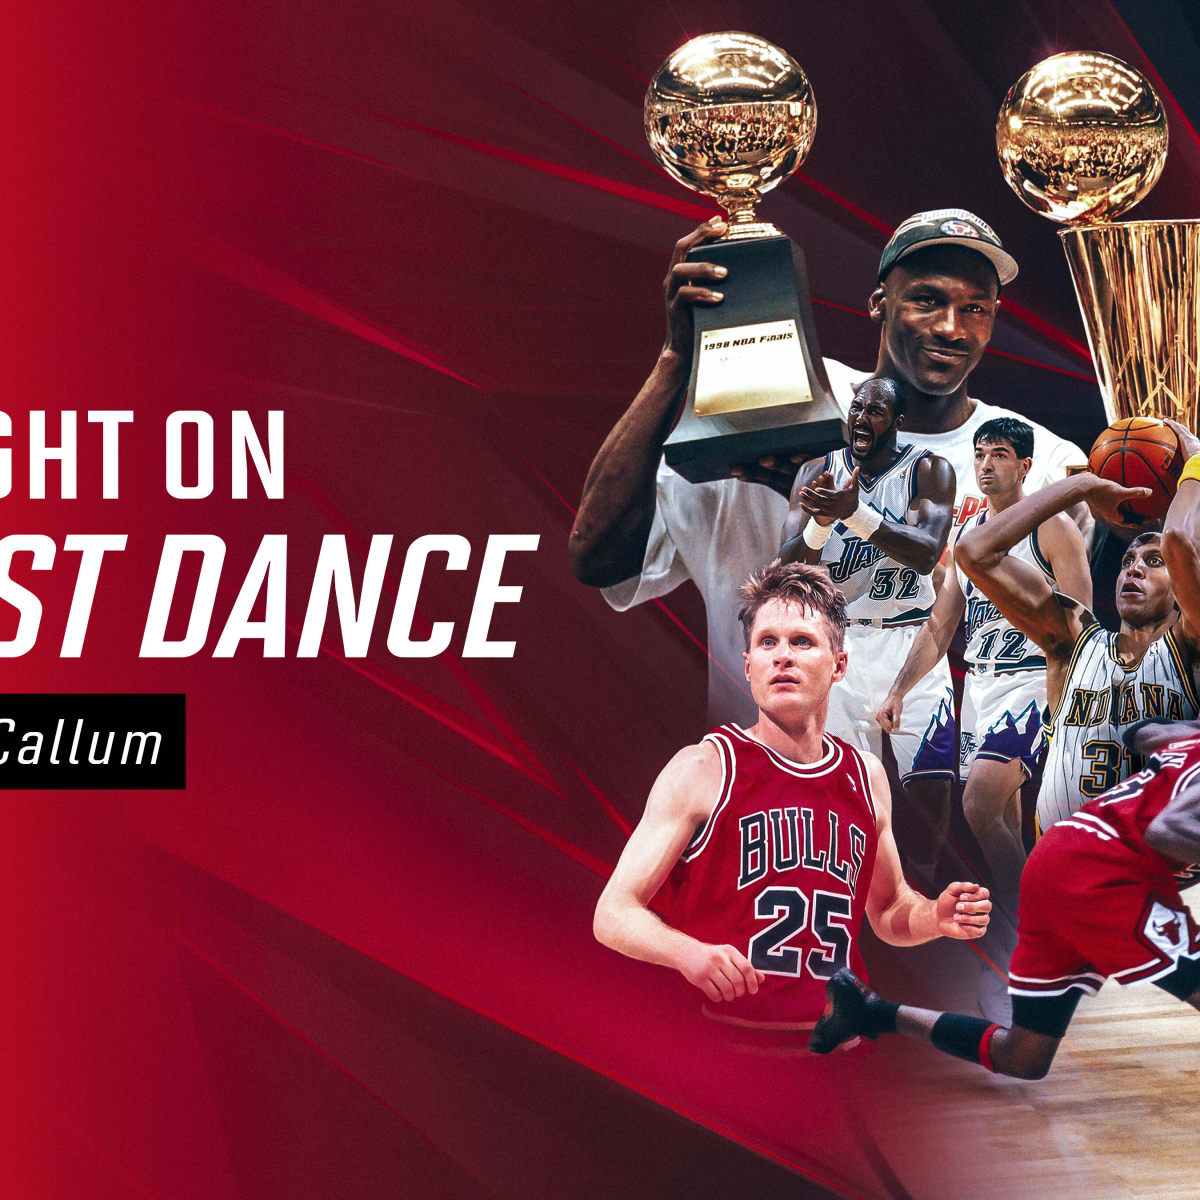 The Last Dance” Shows a Michael Jordan You May Know and a Scottie